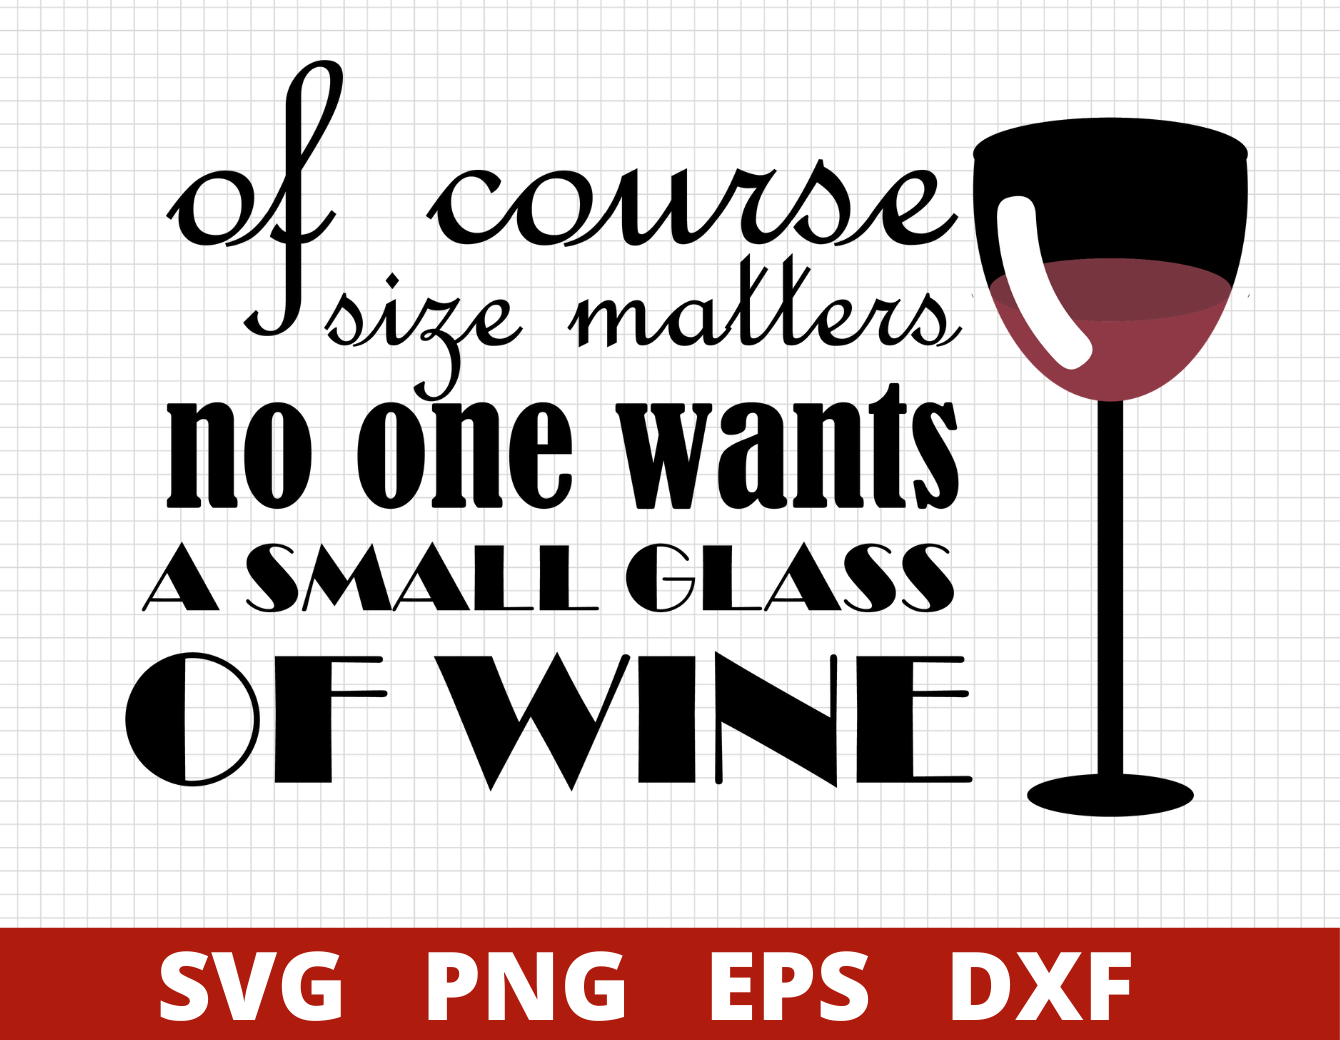 Alcohol svg Tshirt quotes Wine shirt svg for wine glass Wine svg Friends svg Save water drink wine svg svg,dxf,ai,pdf,png,eps